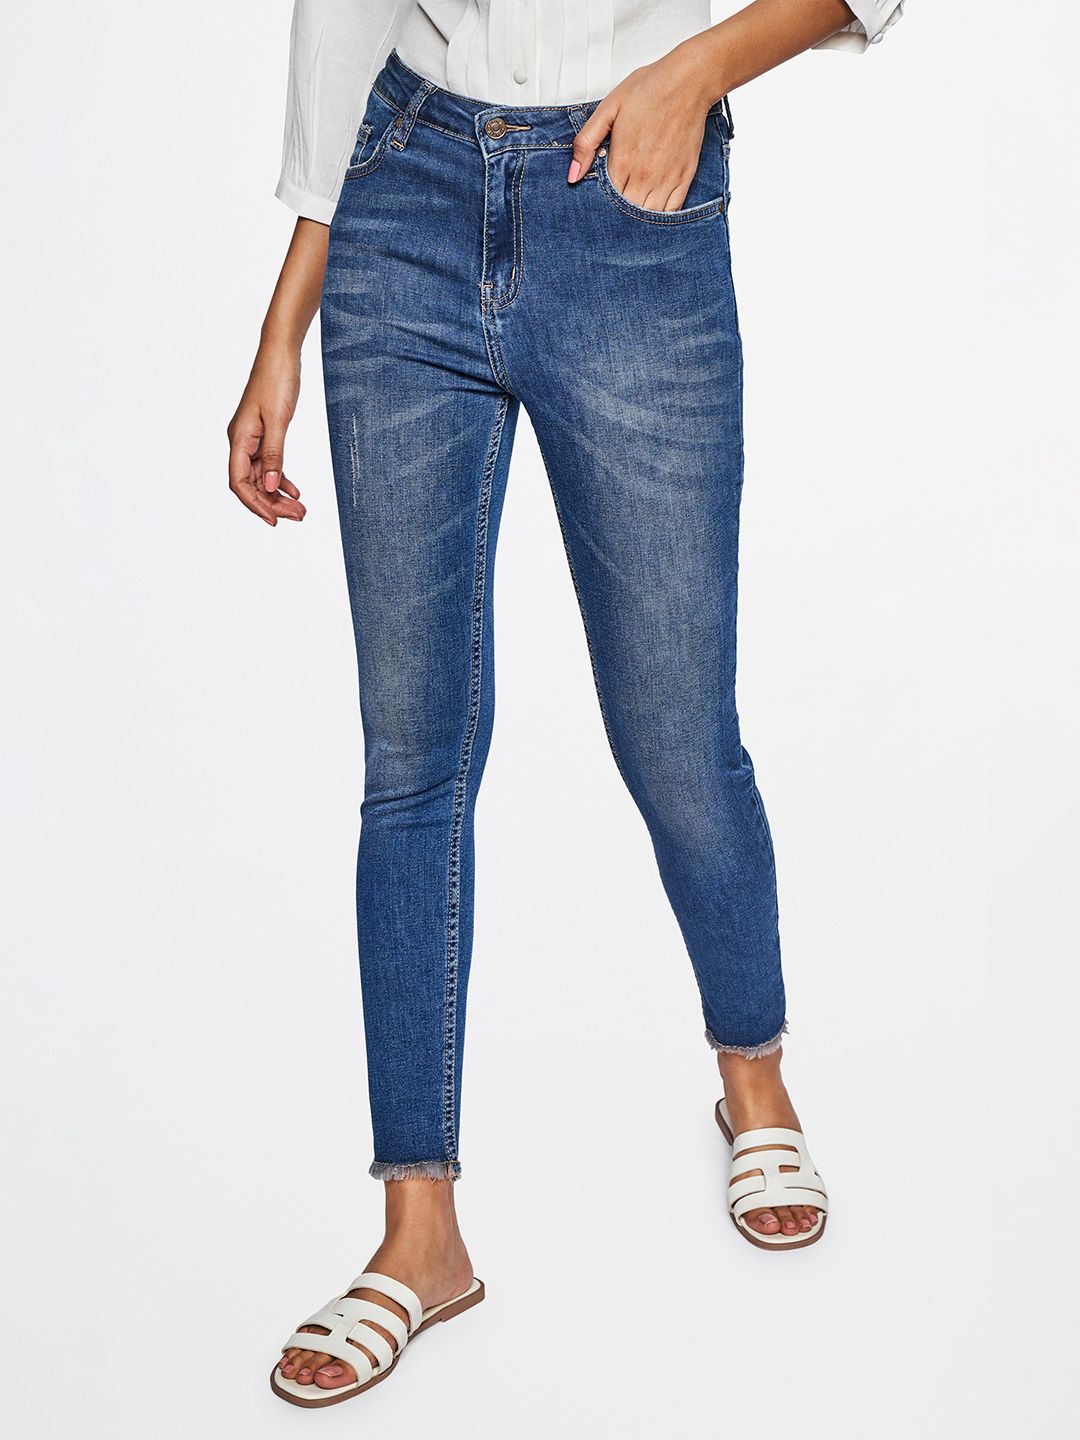 AND Women Blue Skinny Fit Light Fade Stretchable Jeans Price in India